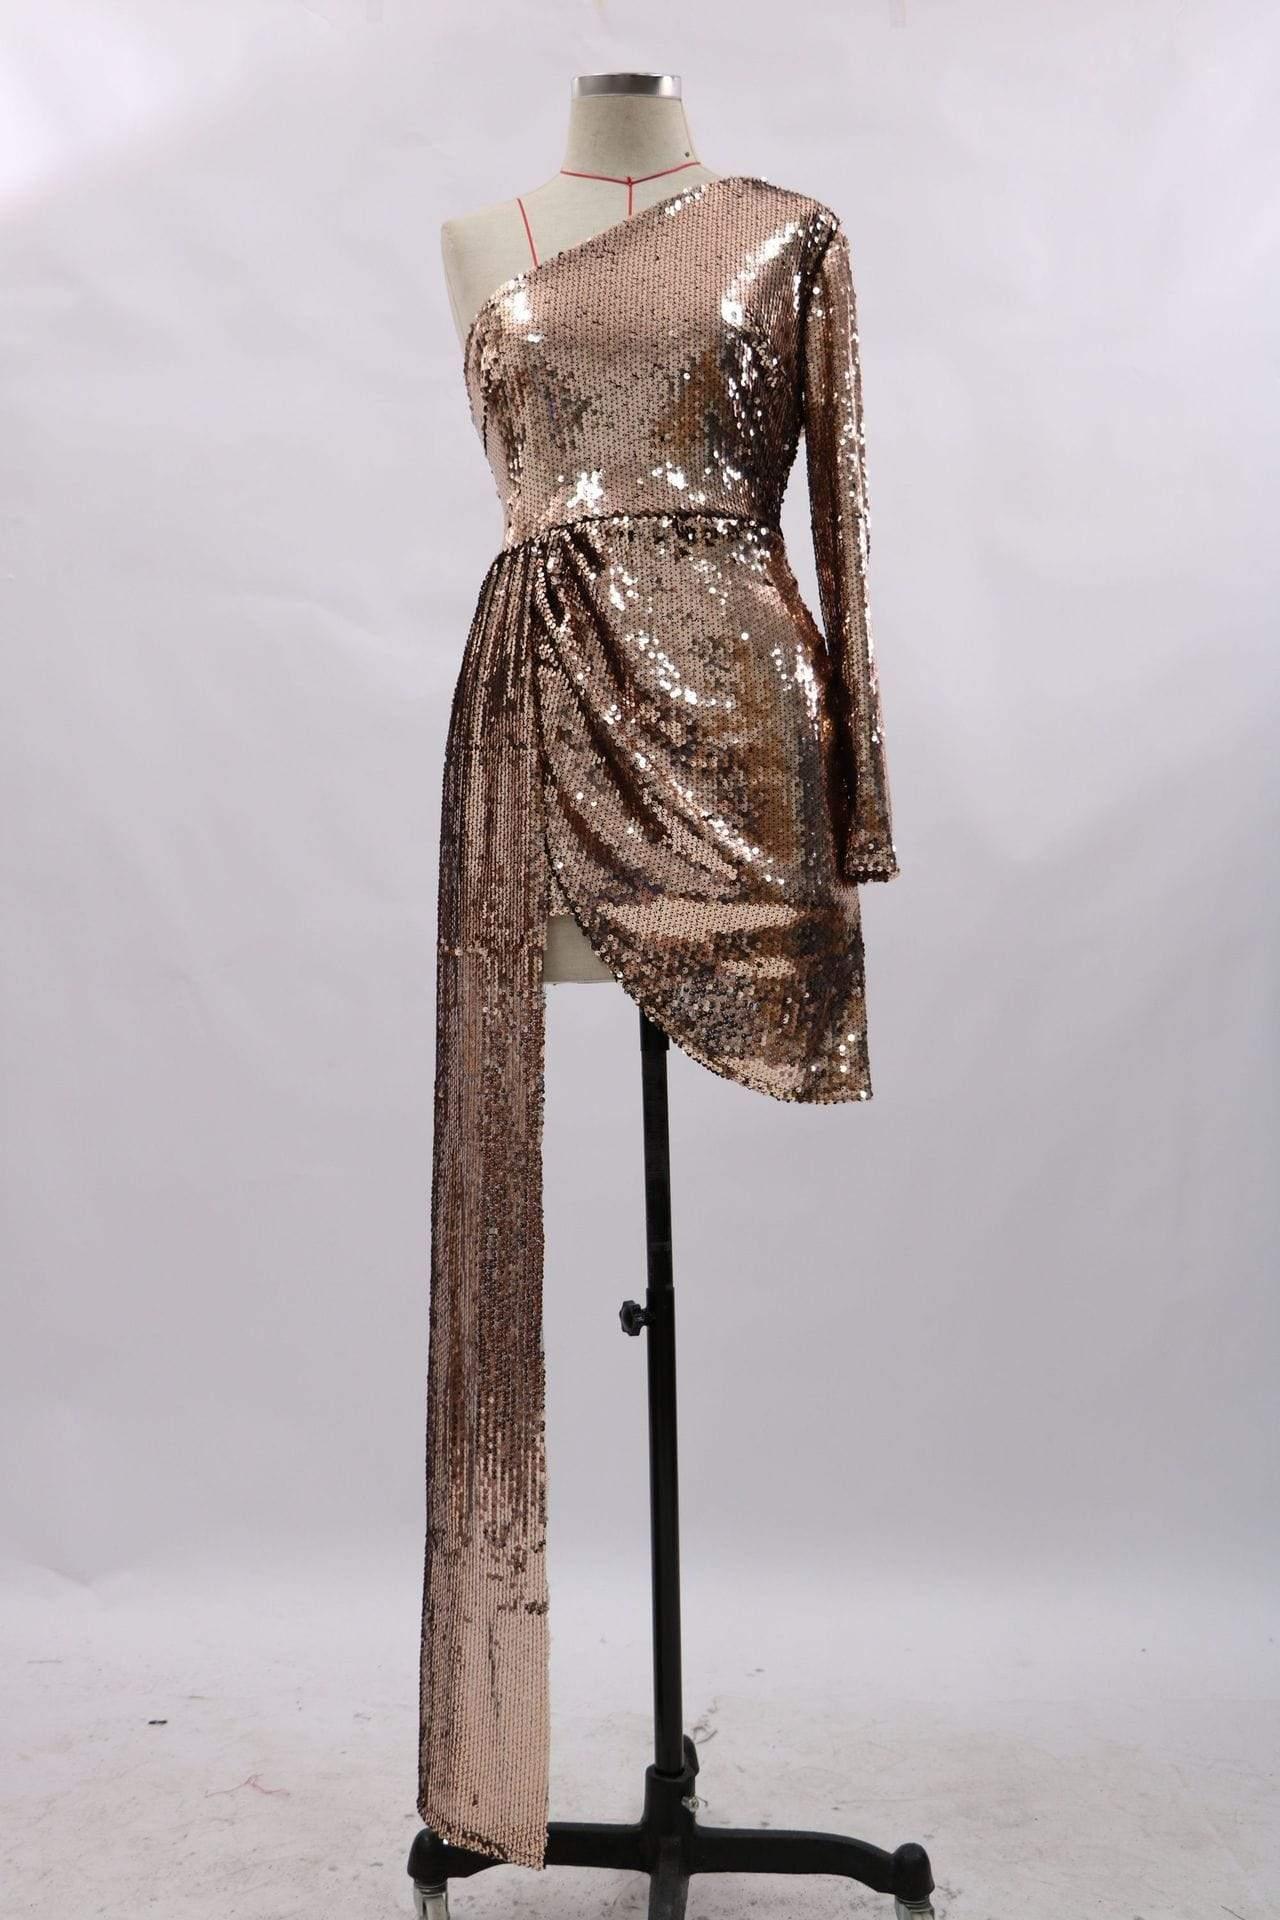 Gold Sparkly Dress - For Women USA